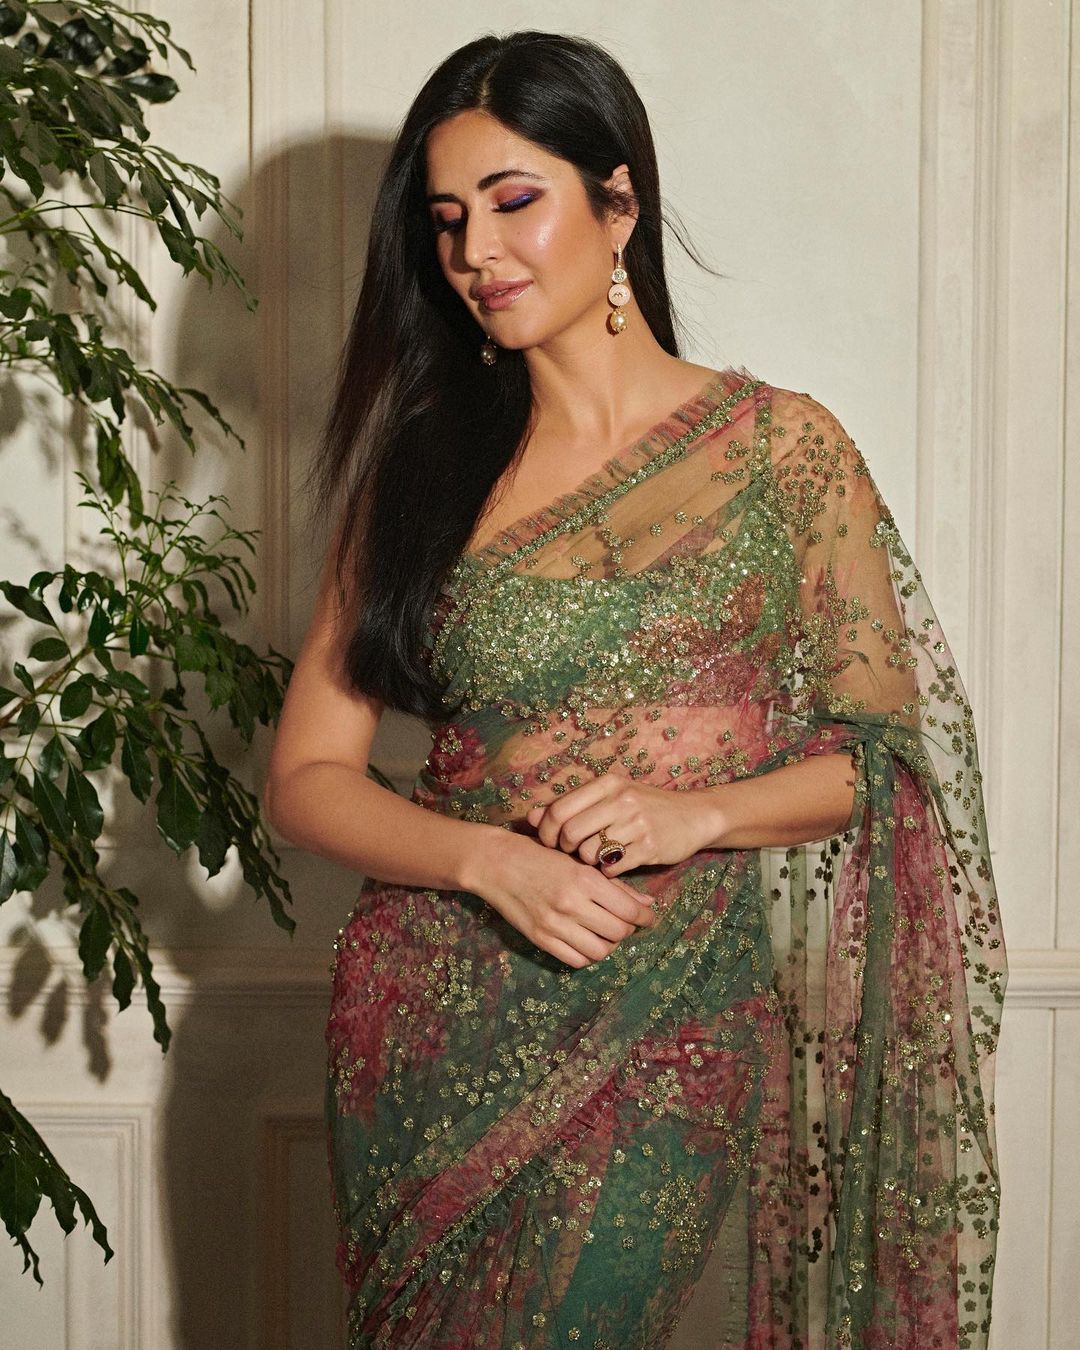 Katrina Kaif is a pcture of elegance in the shimmery semi-sheer saree